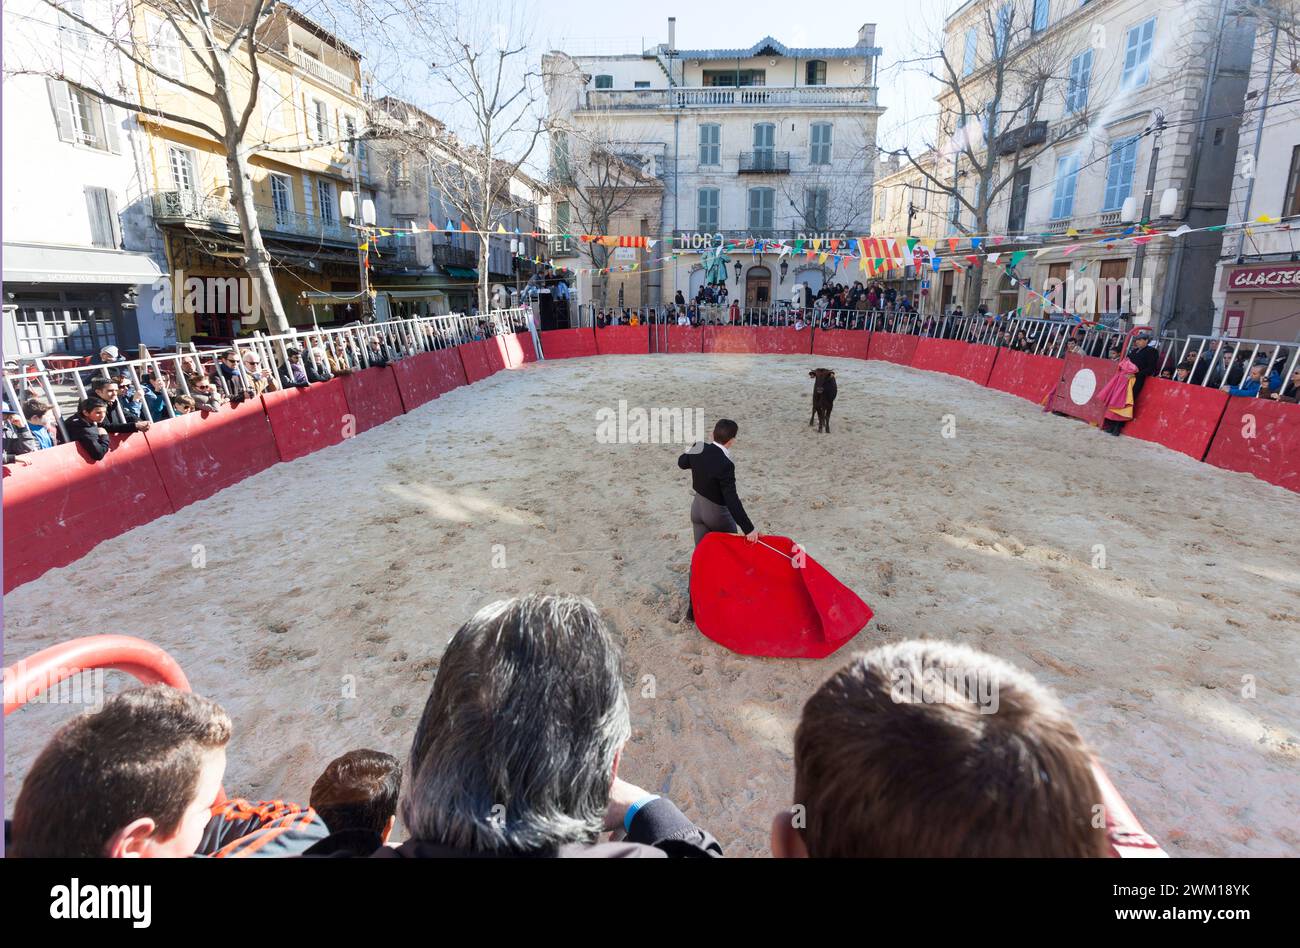 4065419 Arles, Provence (France), March 2, 2014. Show of the Arles bullfight children with young bulls in Place du Forum; (add.info.: Arles, Provence (France), March 2, 2014. Show of the Arles bullfight children with young bulls in Place du Forum  Arles, Provenza (Francia), 2 marzo 2014. Esibizione dei bambini della scuola taurina di Arles con giovani tori in place du Forum); © Marcello Mencarini. All rights reserved 2024. Stock Photo